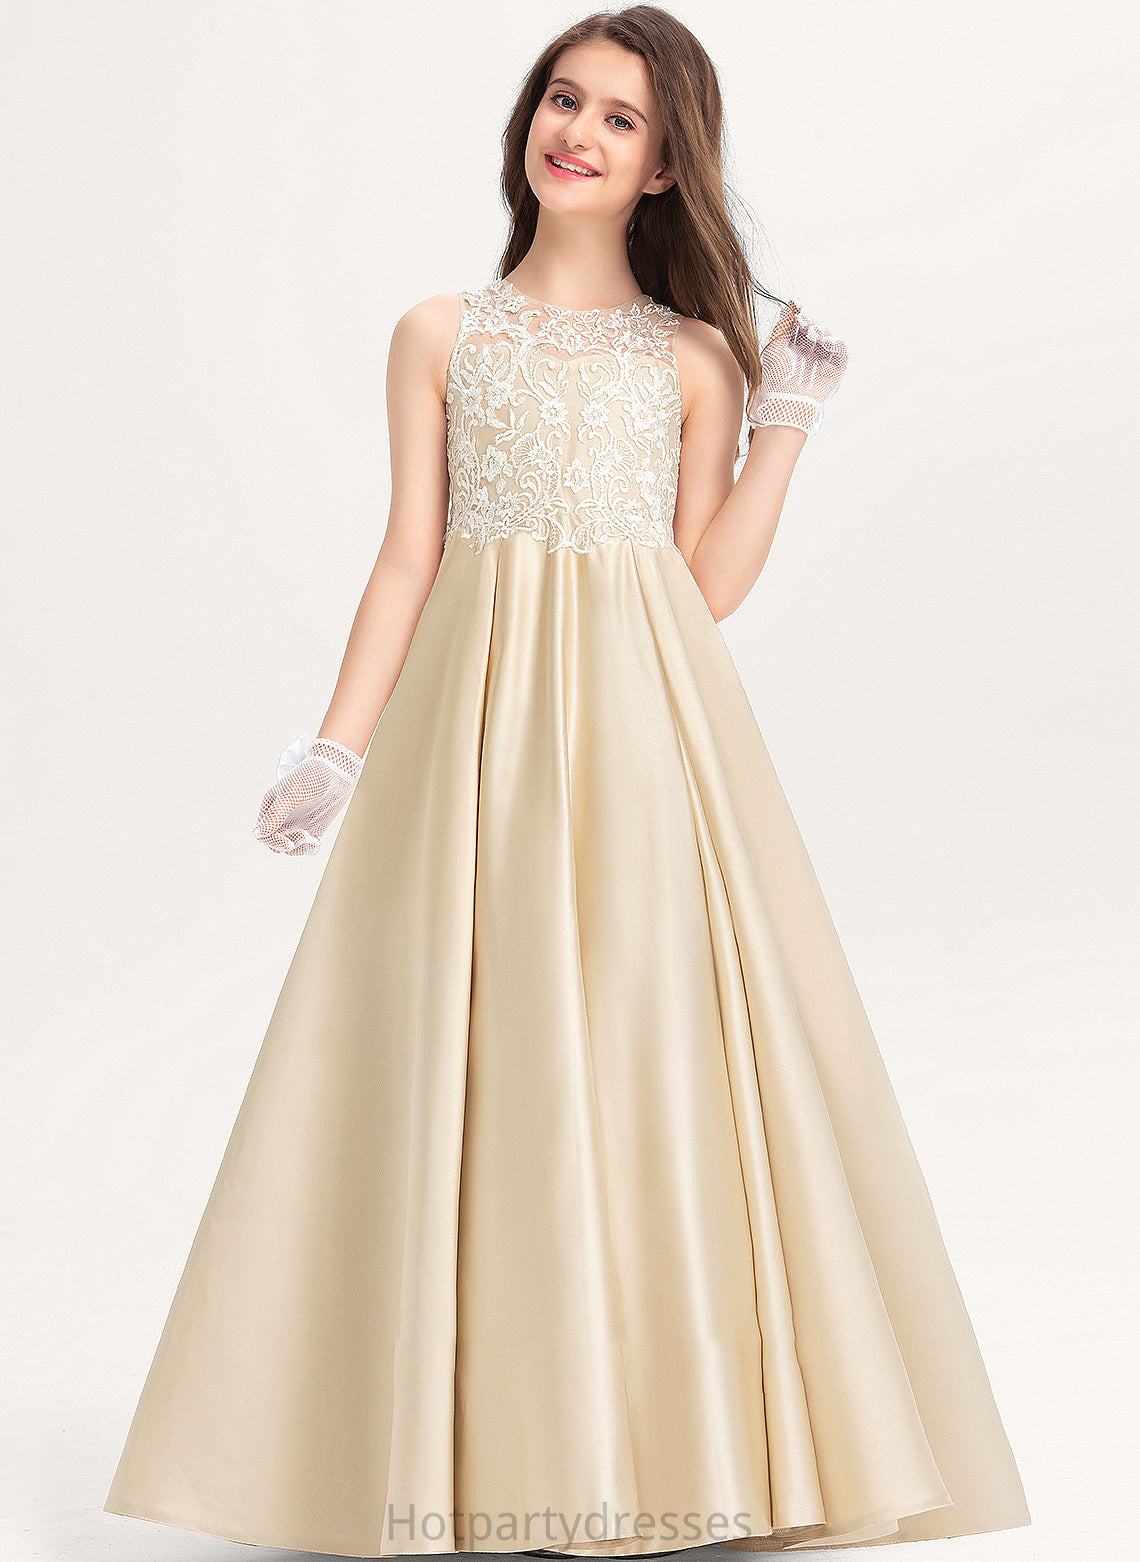 Neck Lace Junior Bridesmaid Dresses Melany Floor-Length Satin Scoop Ball-Gown/Princess